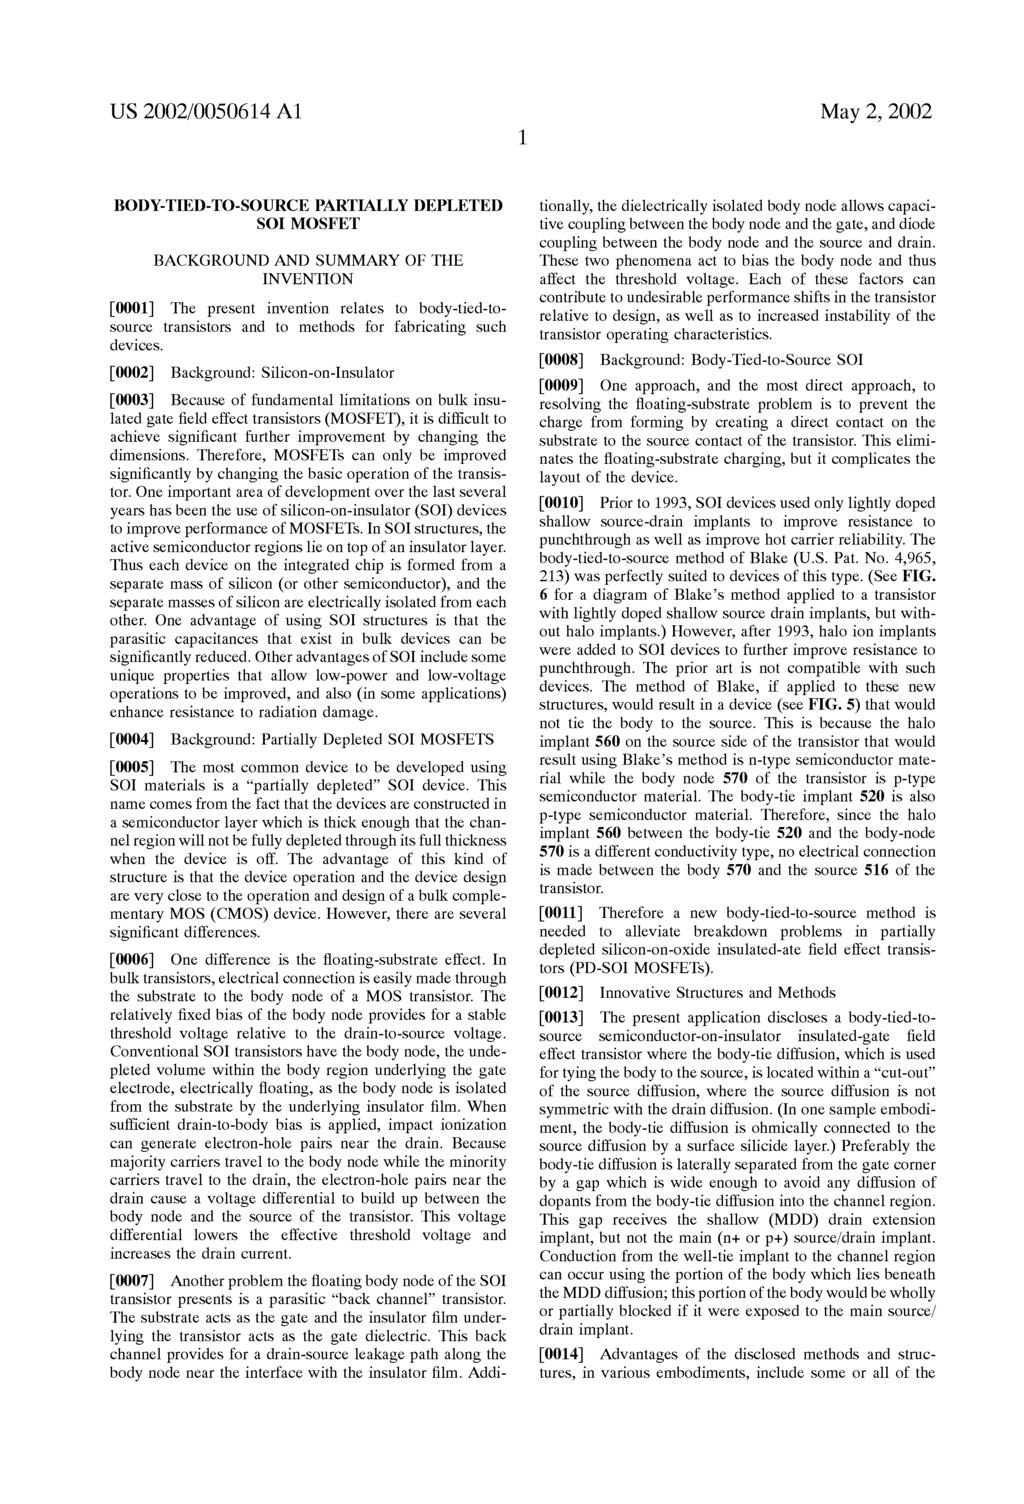 US 2002/0050614 A1 May 2, 2002 BODY-TIED-TO-SOURCE PARTIALLY DEPLETED SO MOSFET BACKGROUD AD SUMMARY OF THE IVETIO 0001.